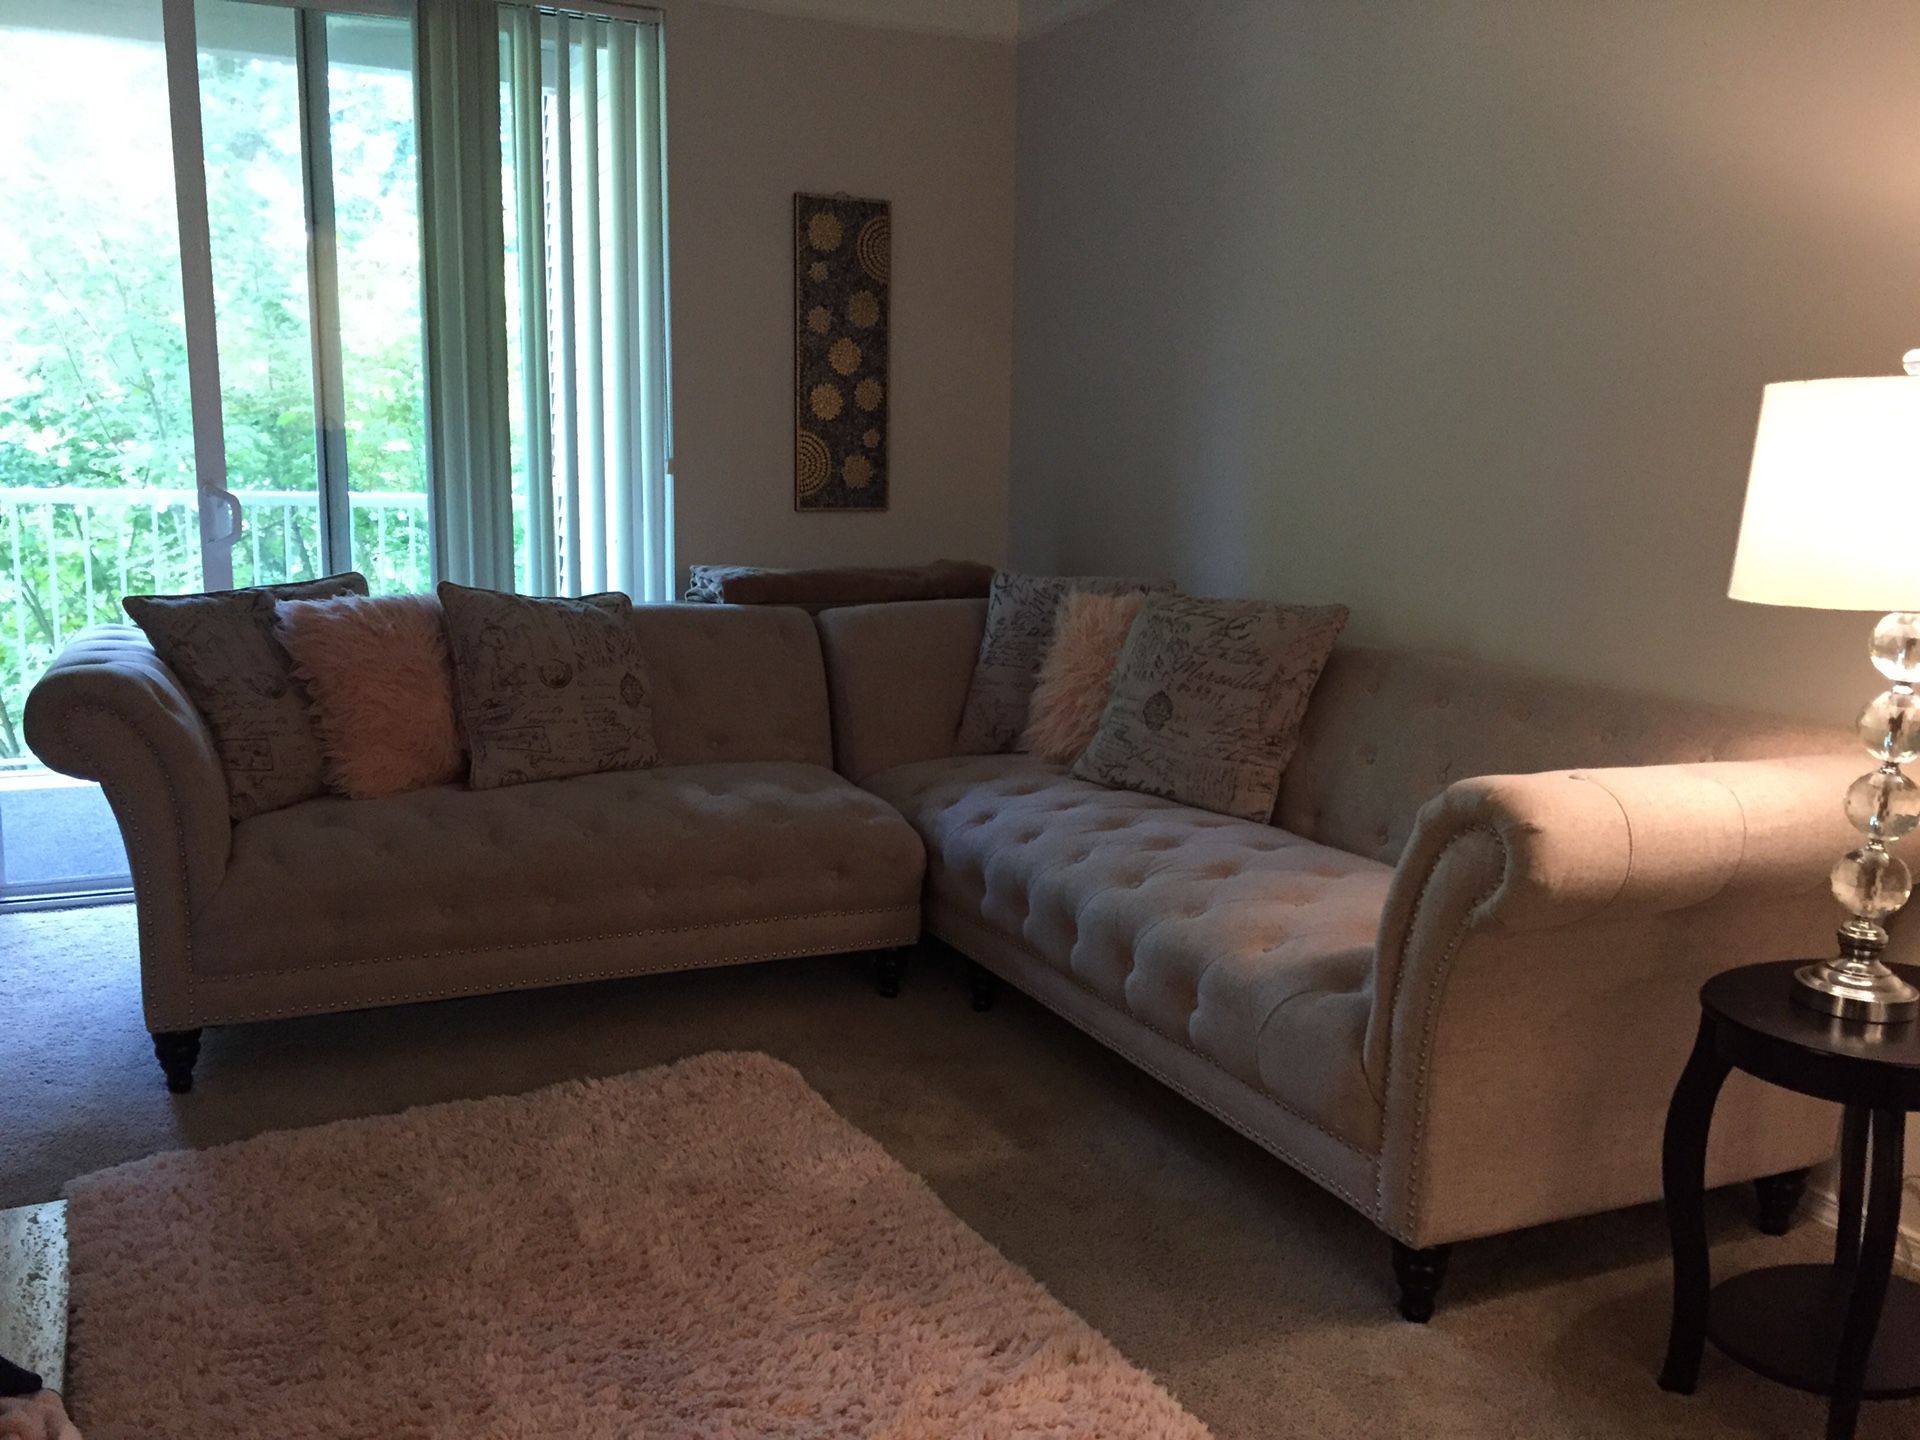 Beige tufted couch